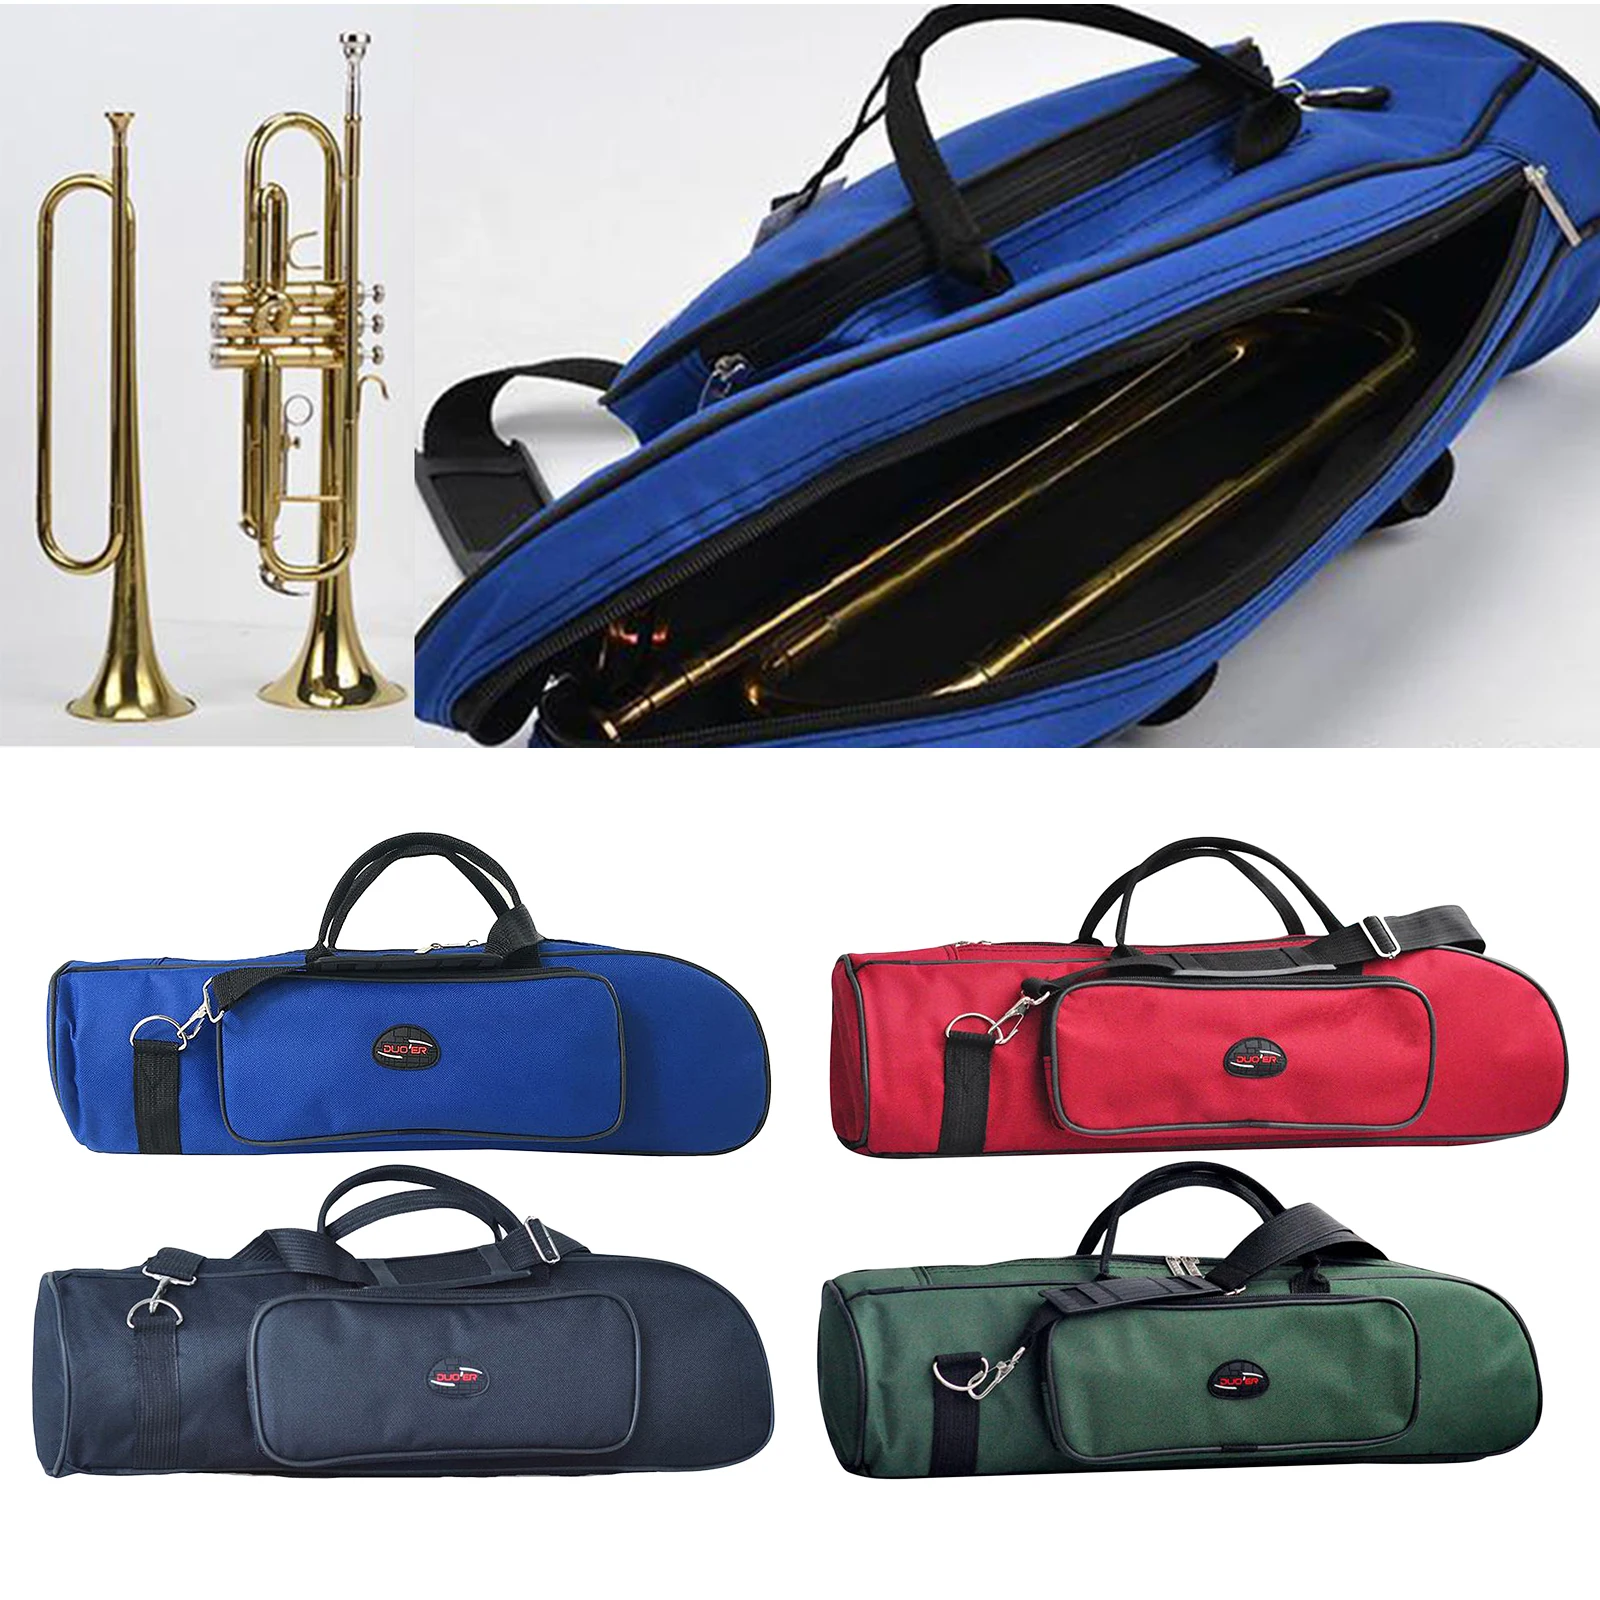 Trumpet Bag Waterproof Oxford Carrying Handle Bags Zipper Case Box Musical Instrument Accessories